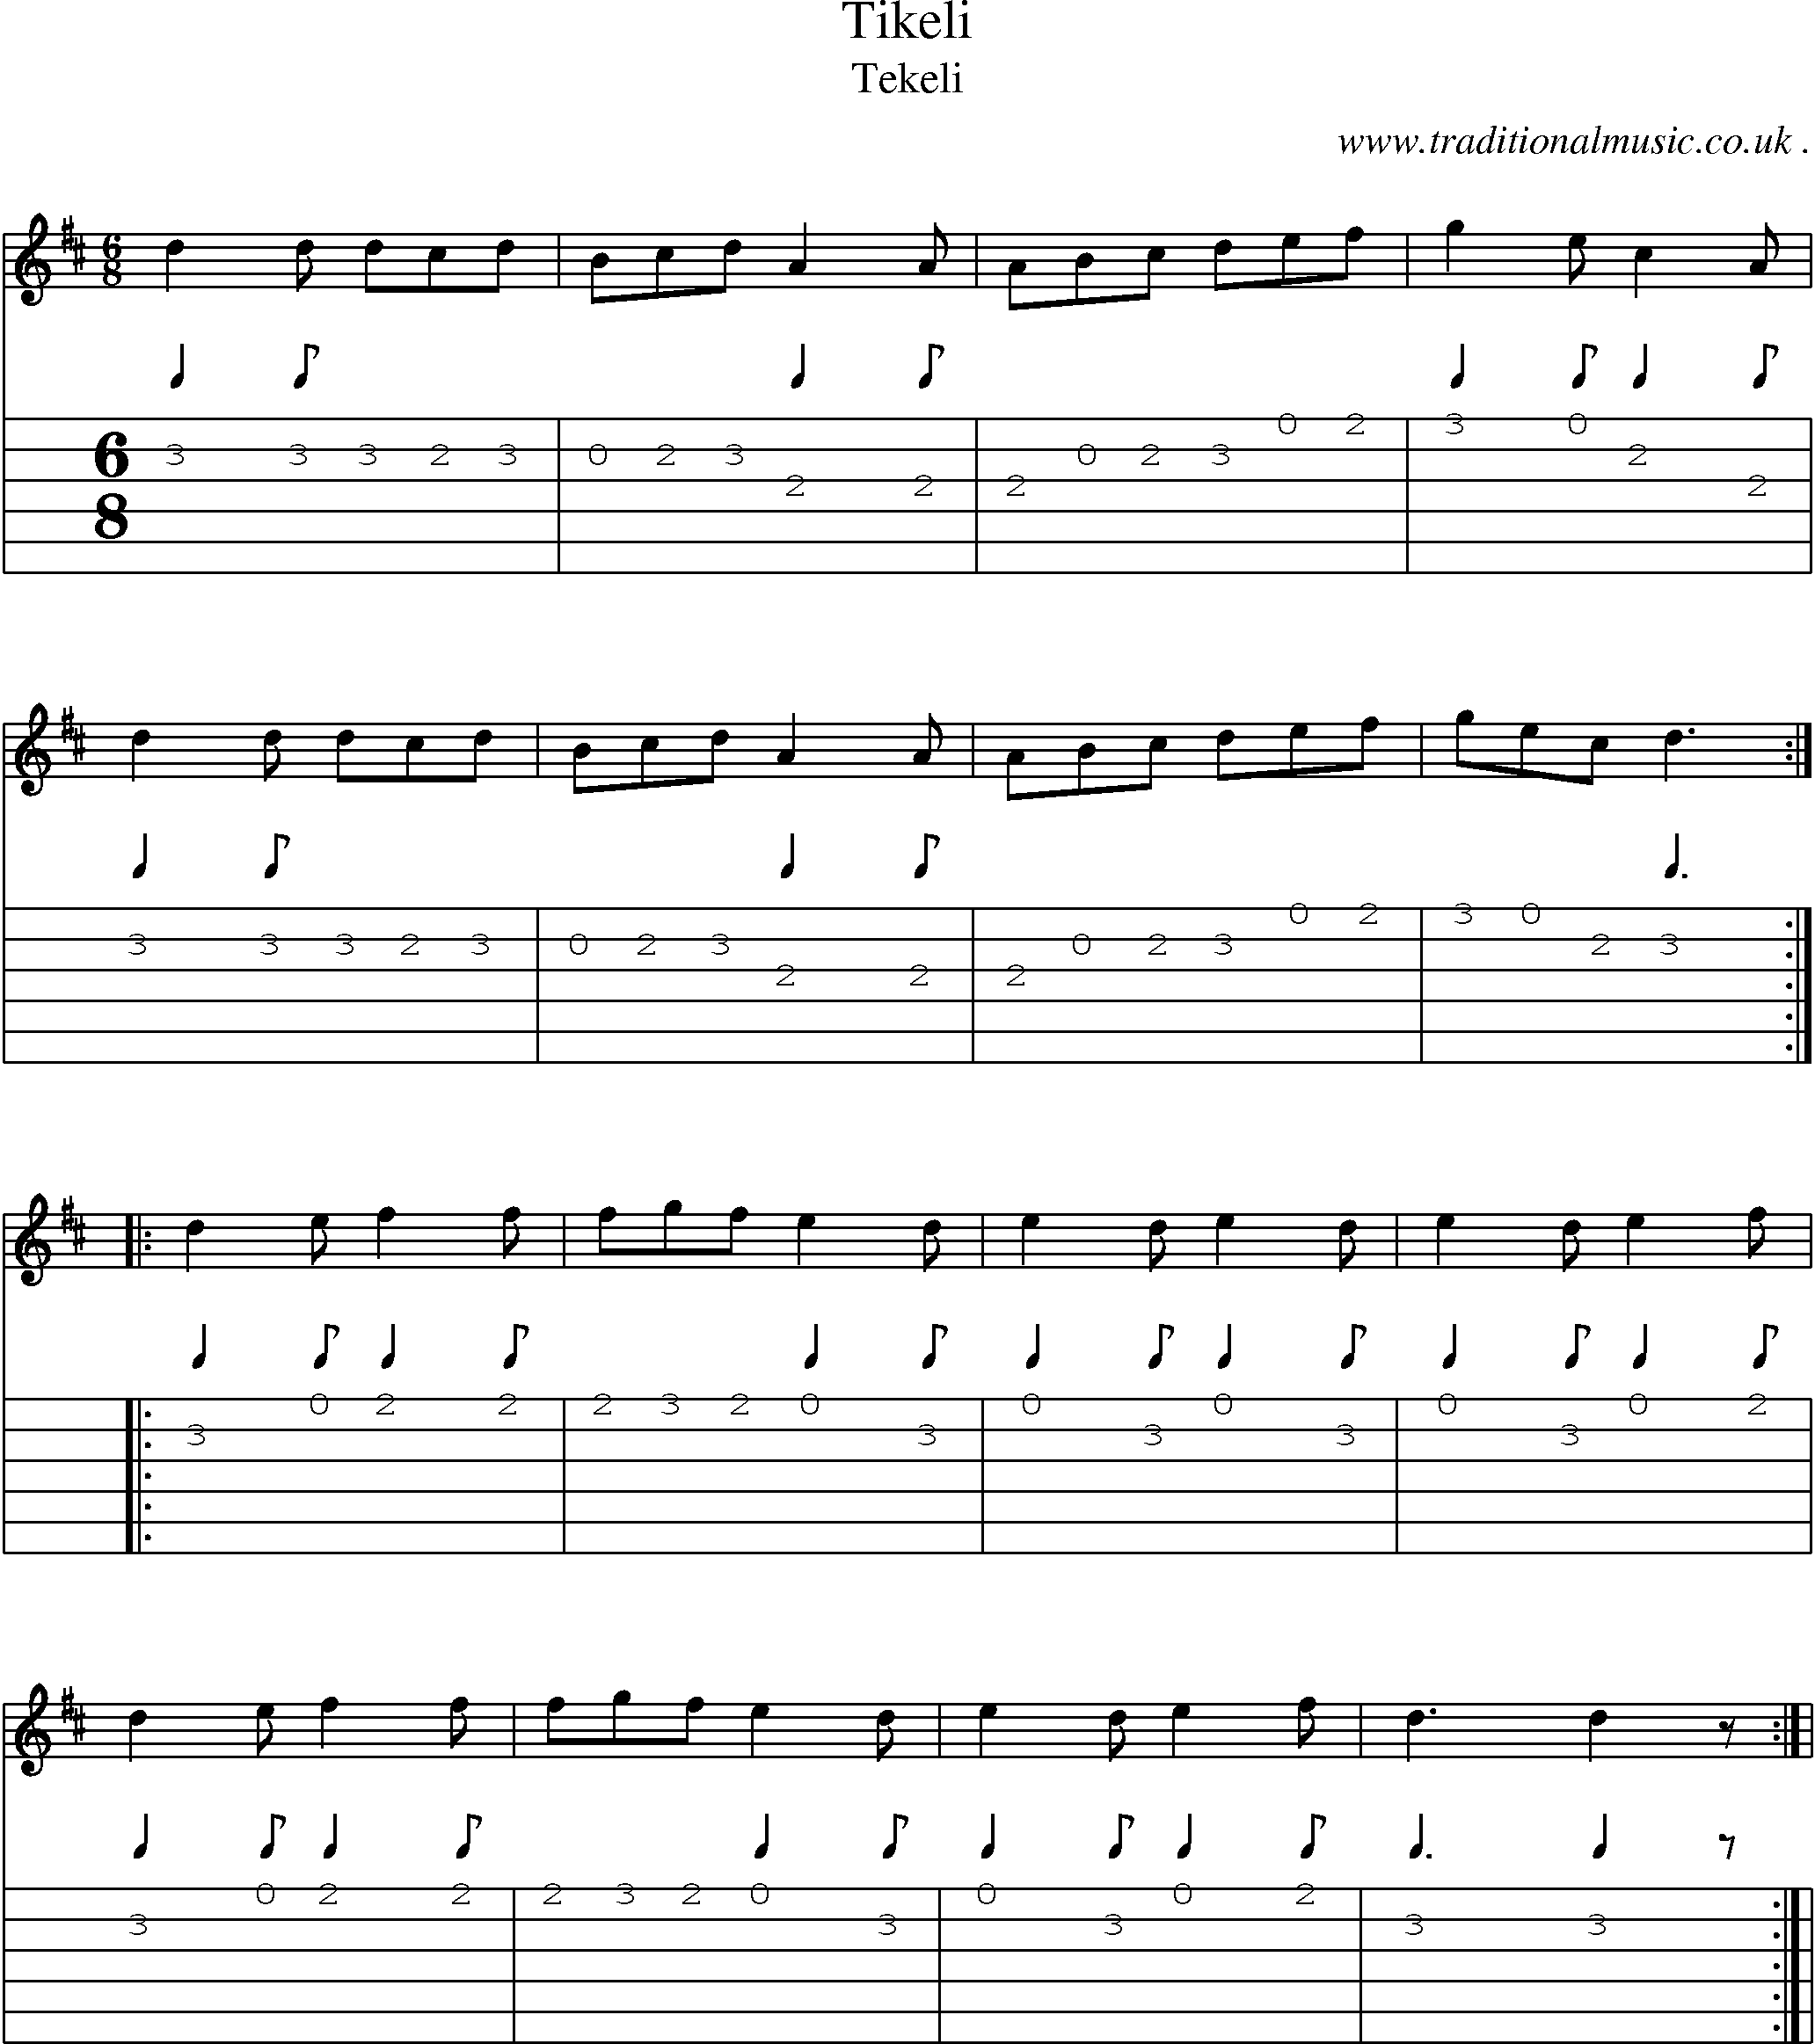 Sheet-Music and Guitar Tabs for Tikeli